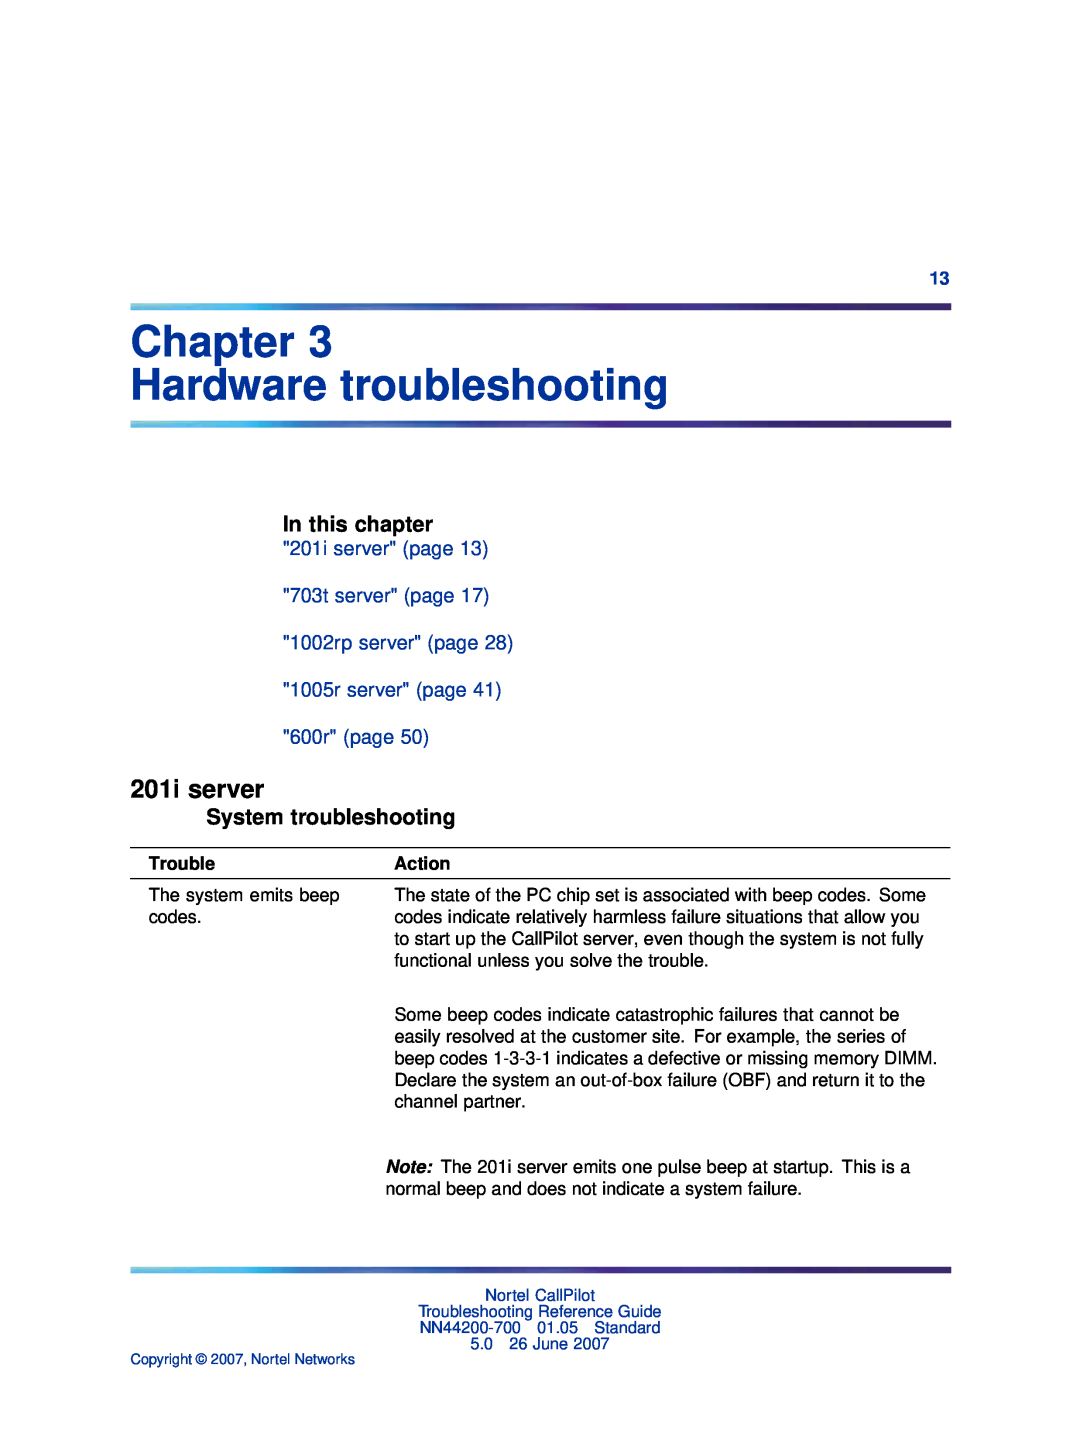 Nortel Networks NN44200-700 Chapter Hardware troubleshooting, 201i server, System troubleshooting, In this chapter, Action 